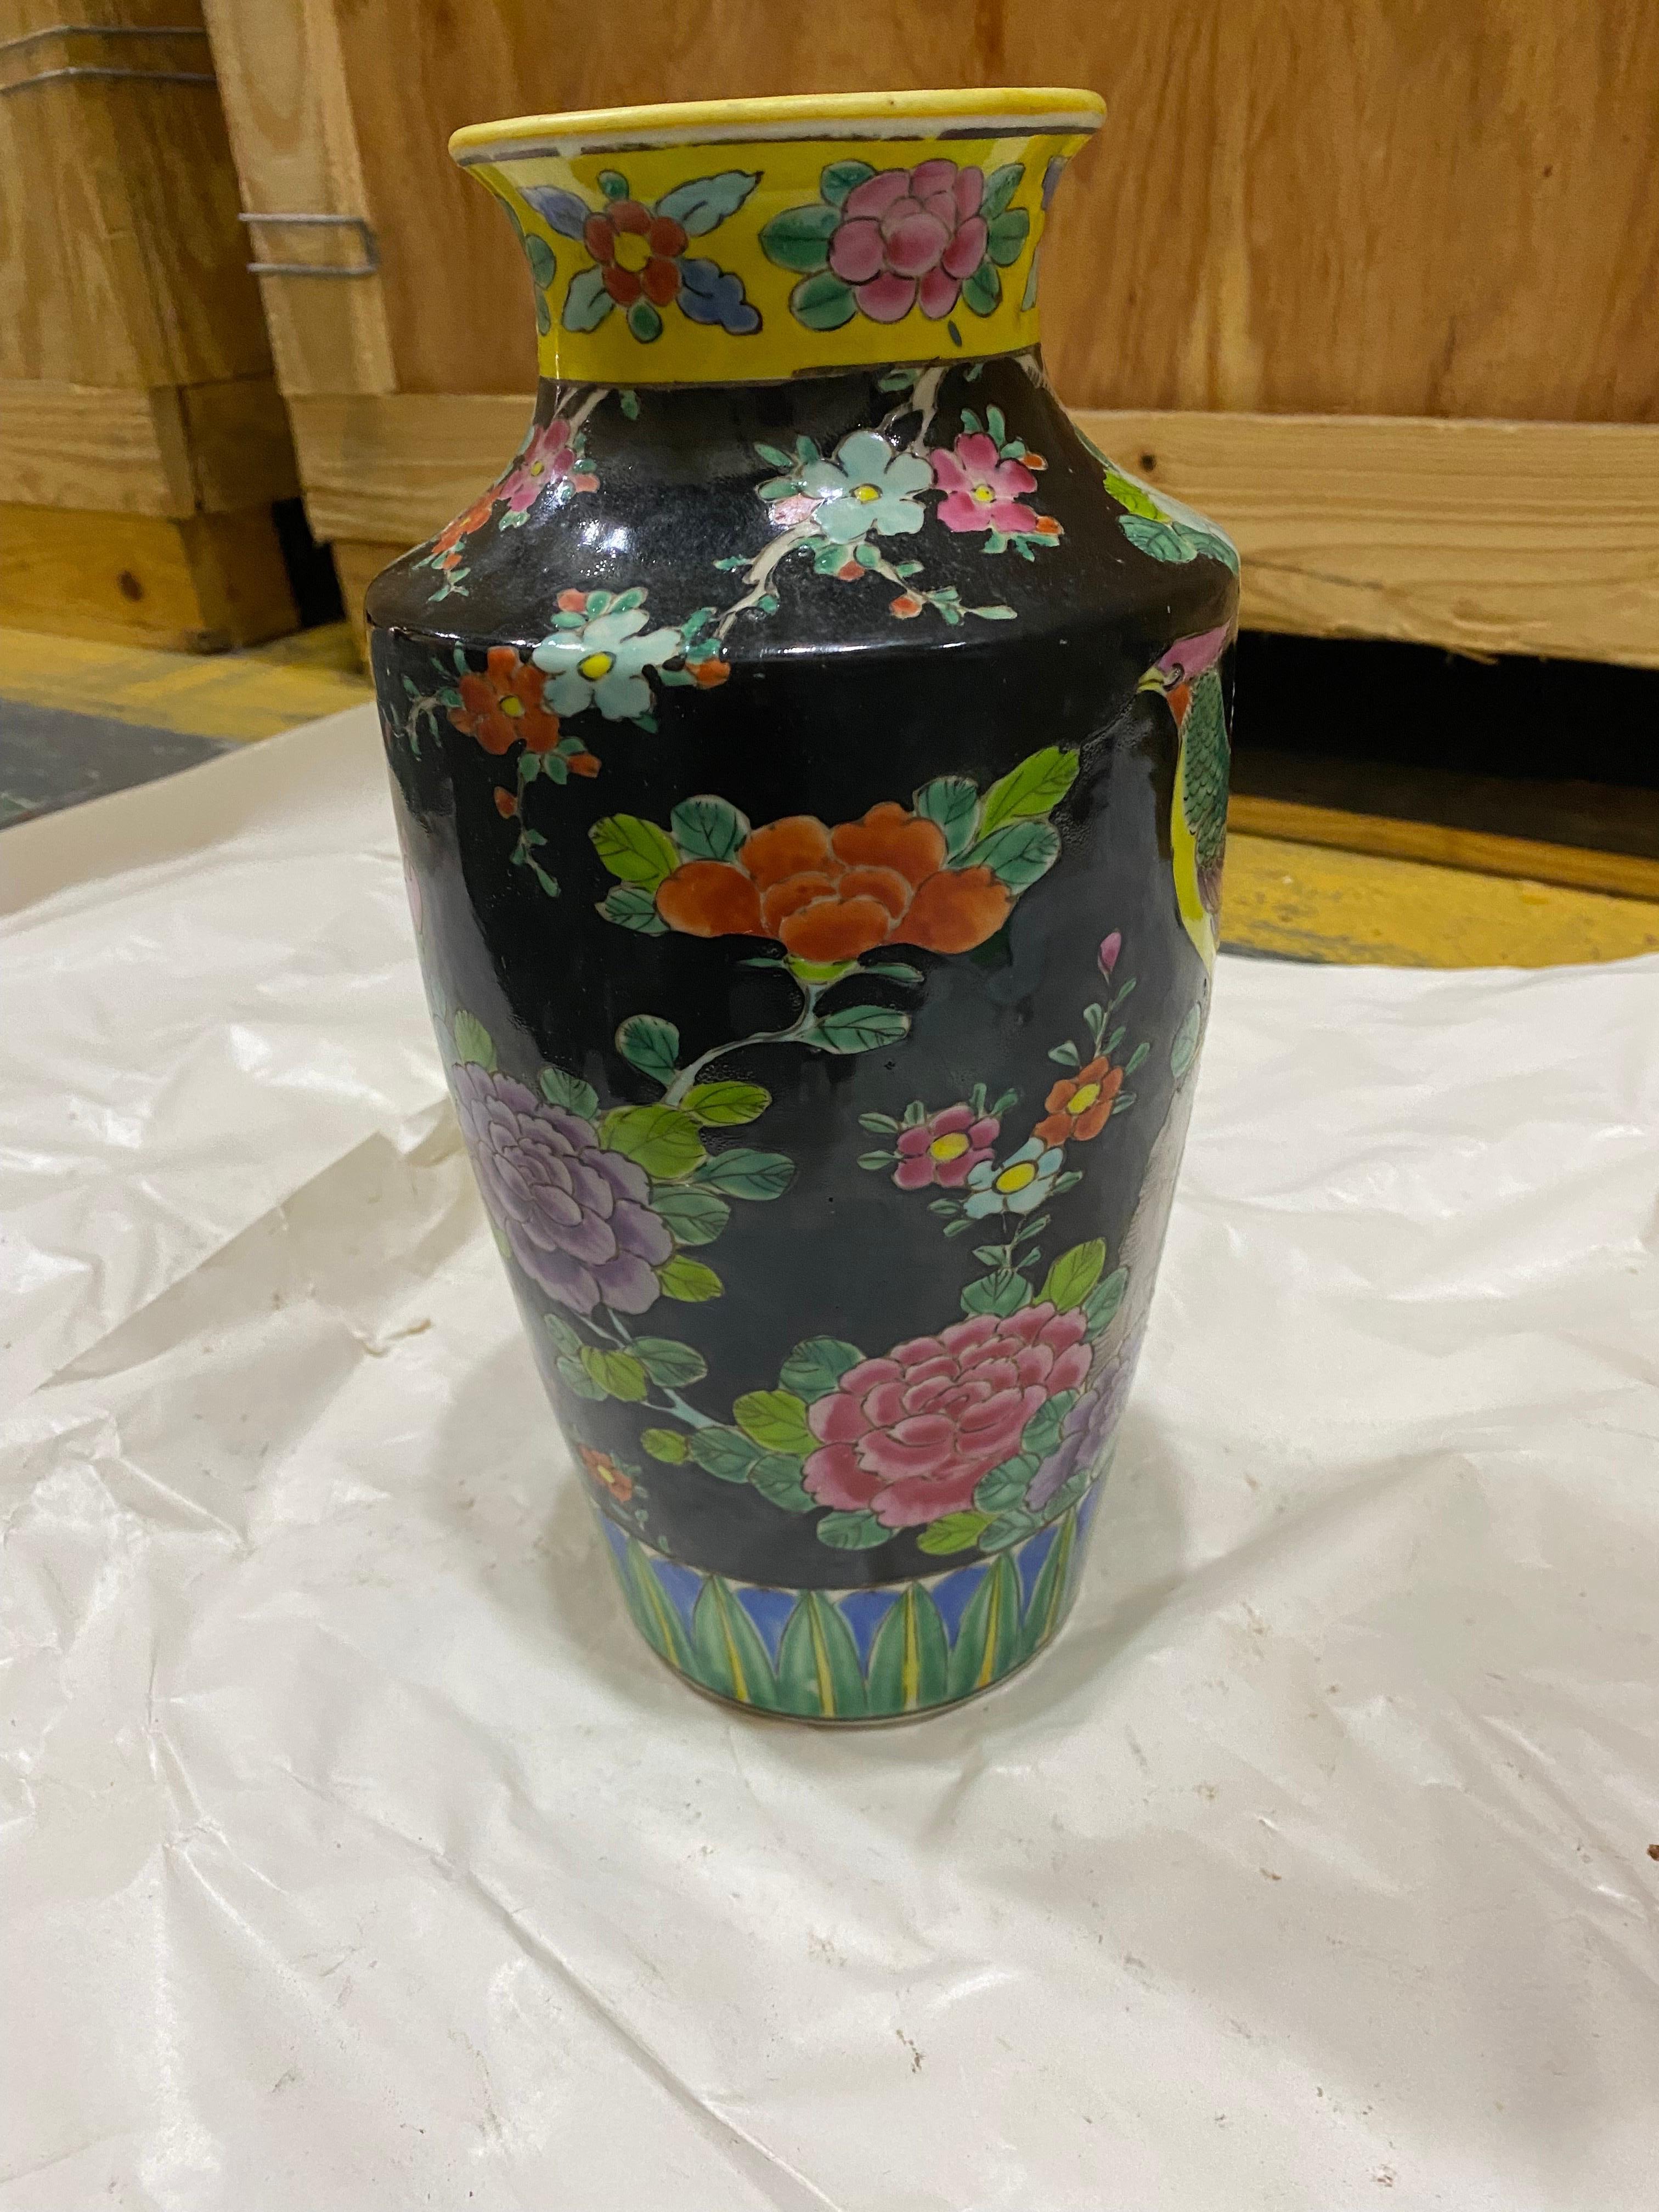 Early 20th C. Chinese Black with Multi Color Glazed Rooster Vase
This lovely vase was painted to look like cloisonne work. Set on a black ground the beloved rooster perched on a branch of chrysanthemums are painted in exquisite bright colors of